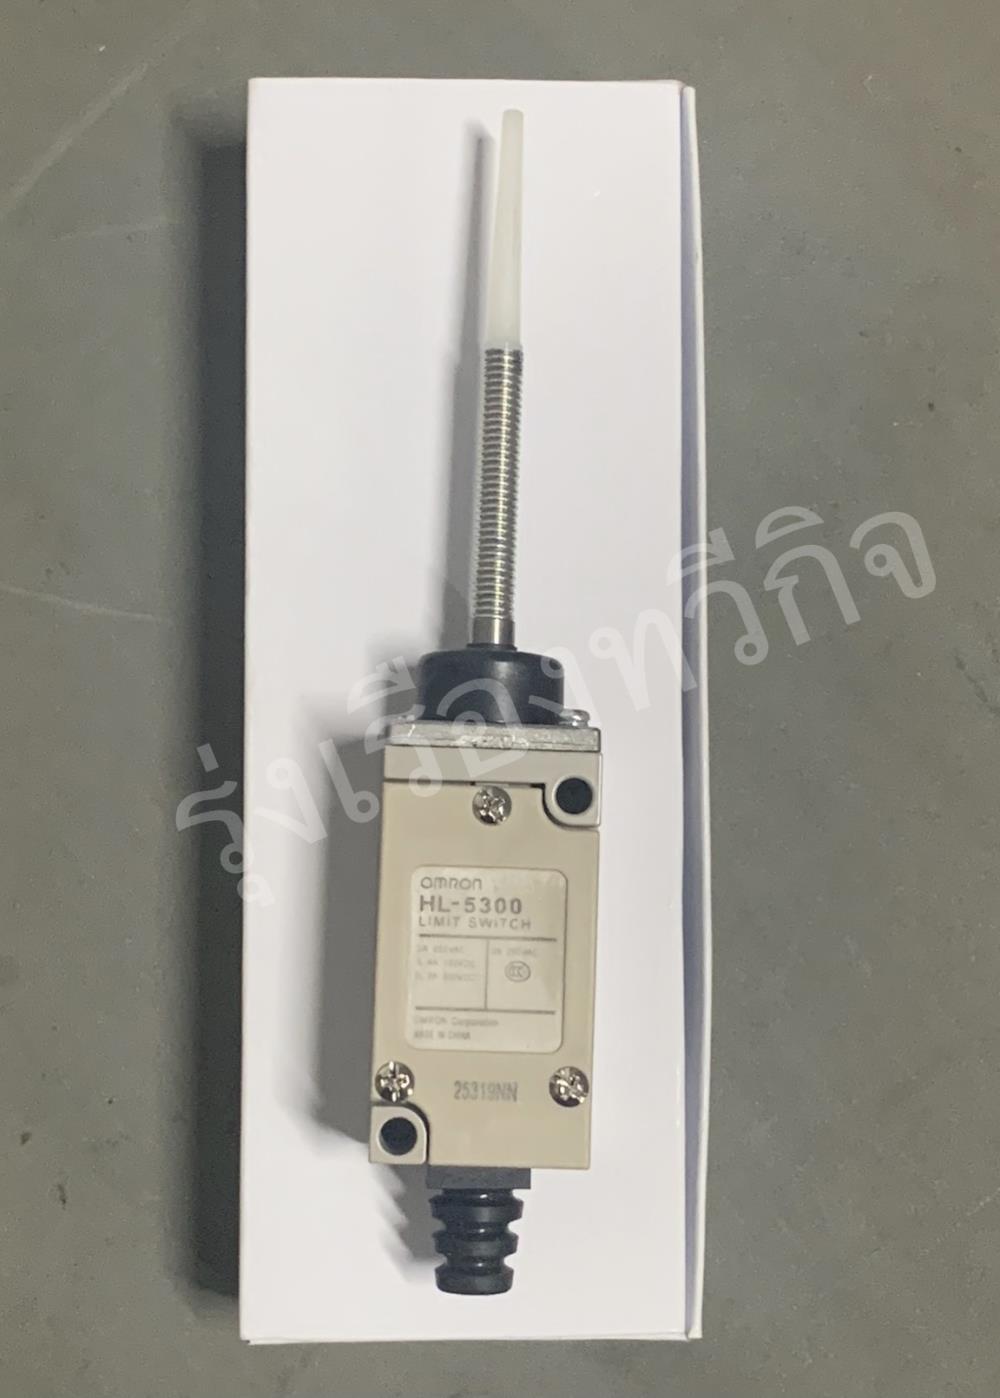 Limit Switch HL-5300 OMRON,Limit Switch HL-5300 OMRON,OMRON,Instruments and Controls/Switches